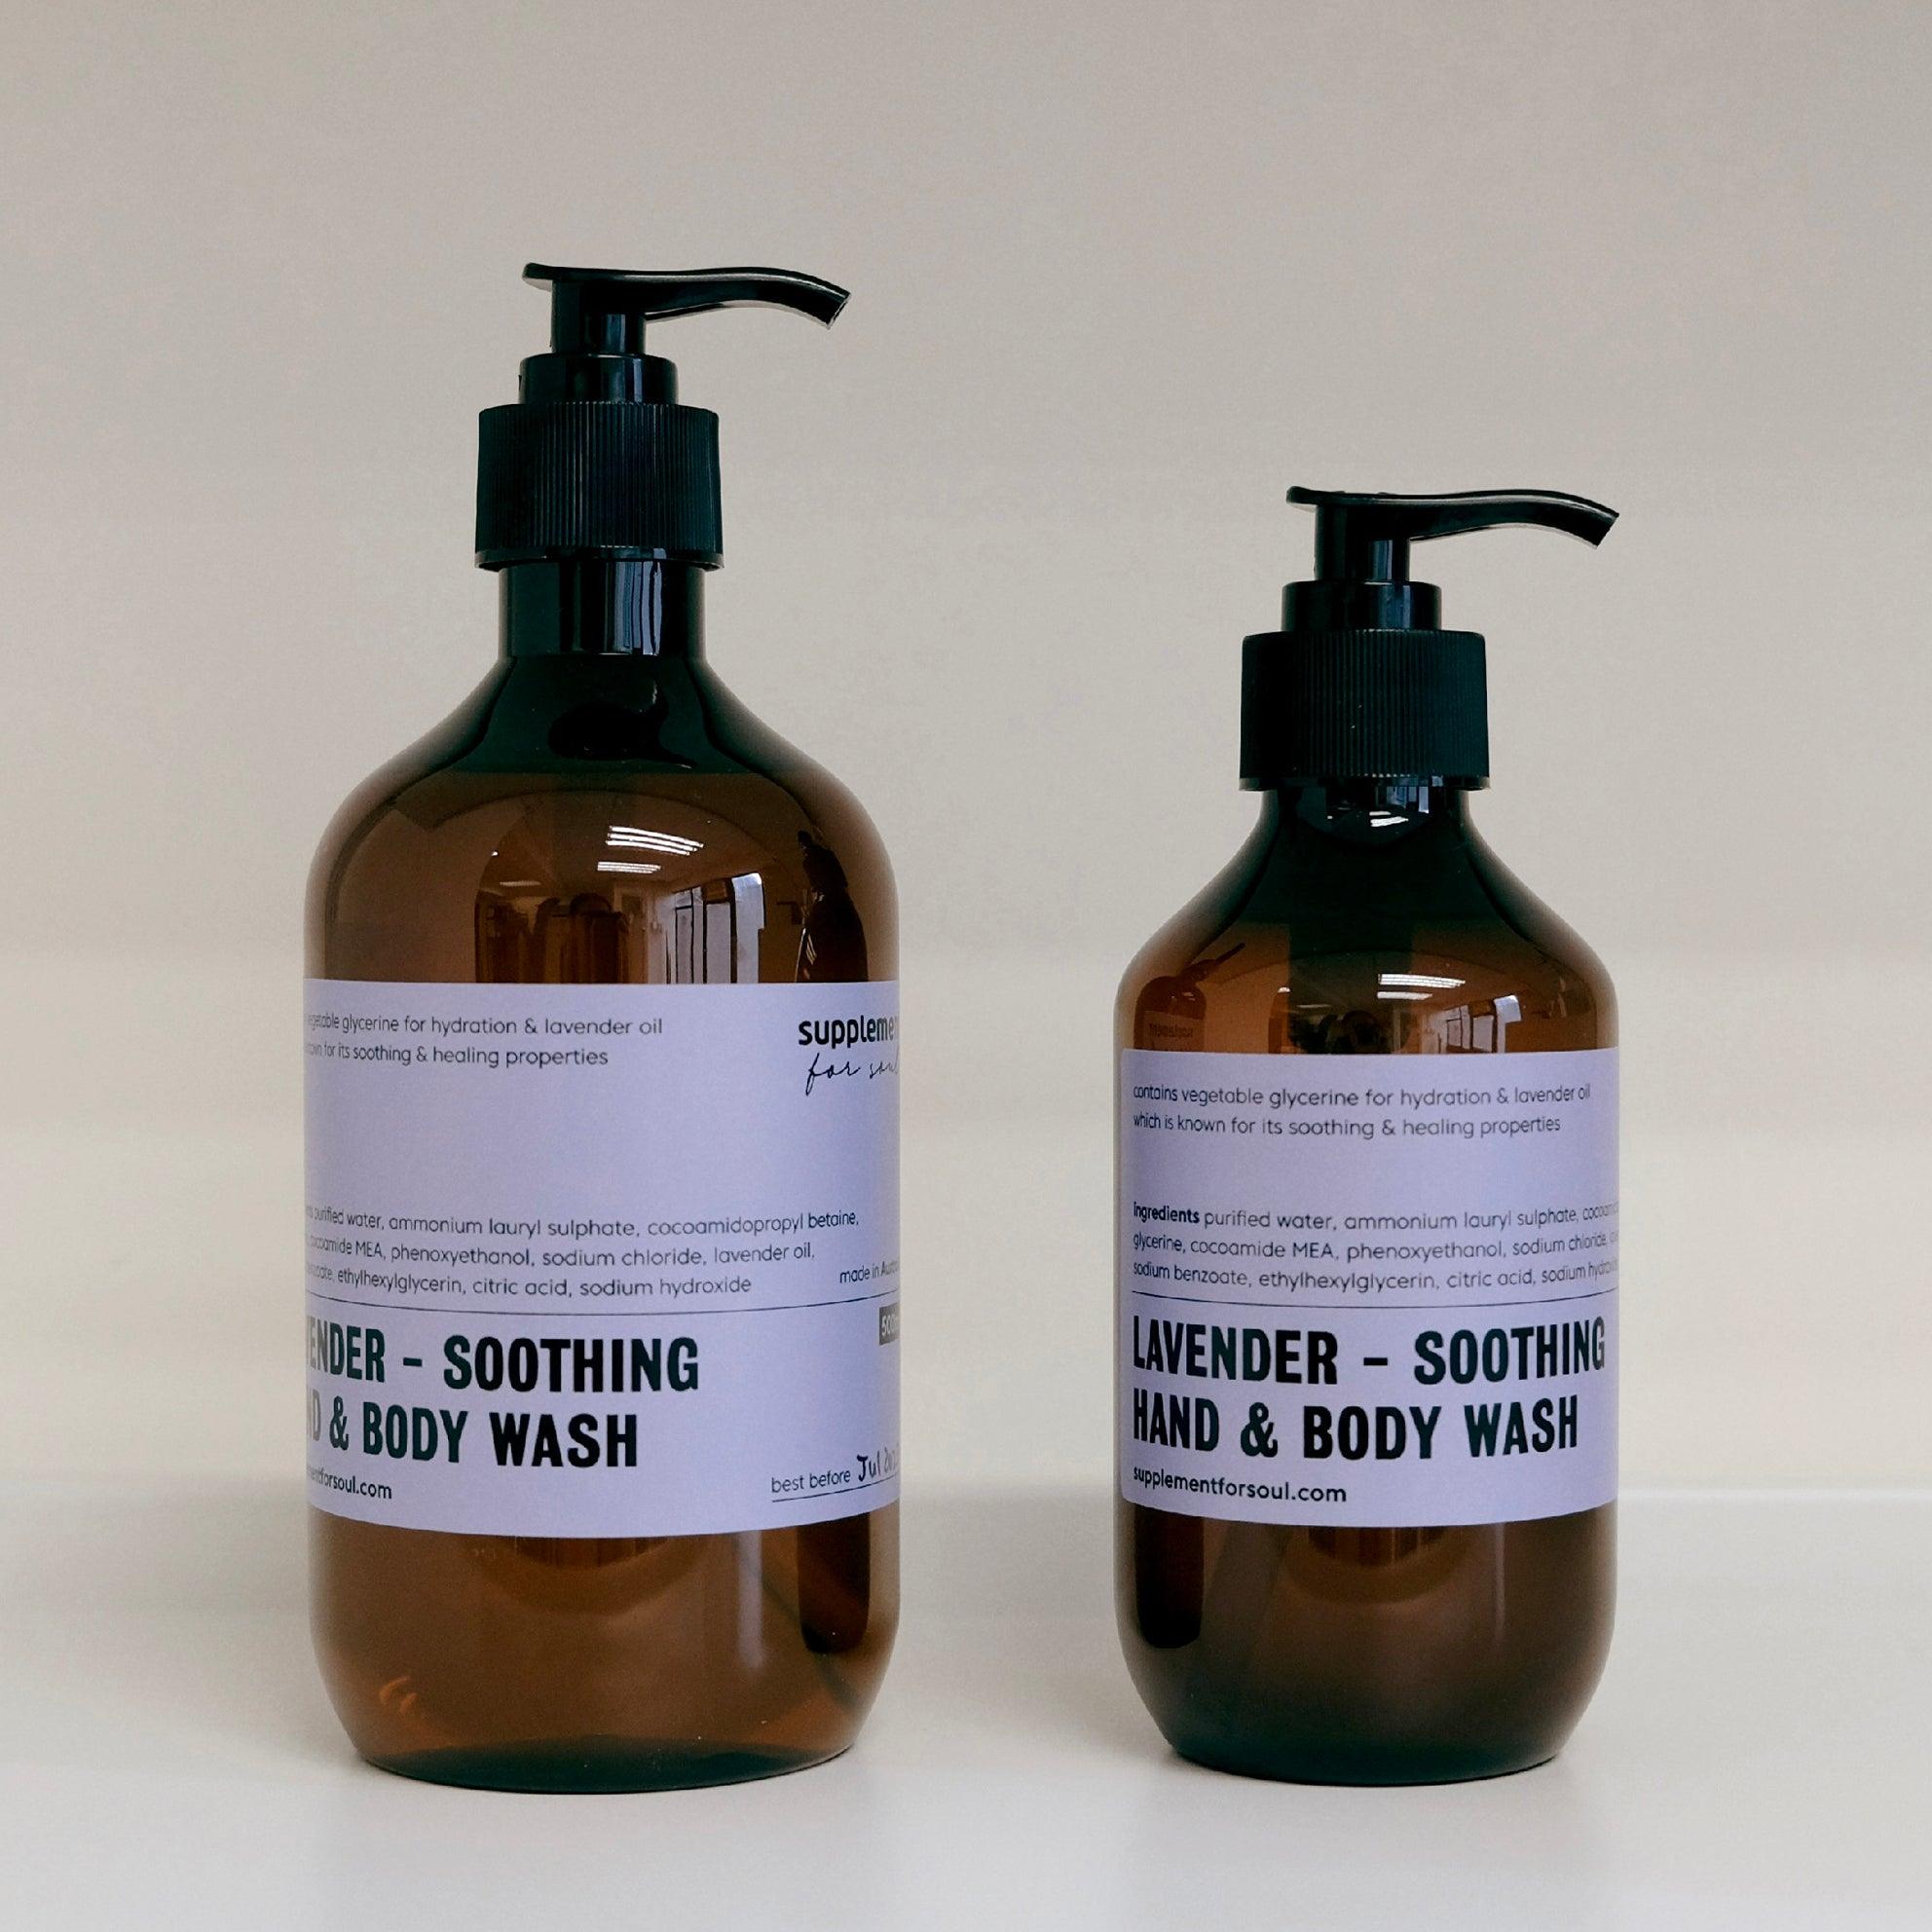 lavender - soothing hand & body wash - supplement for soul